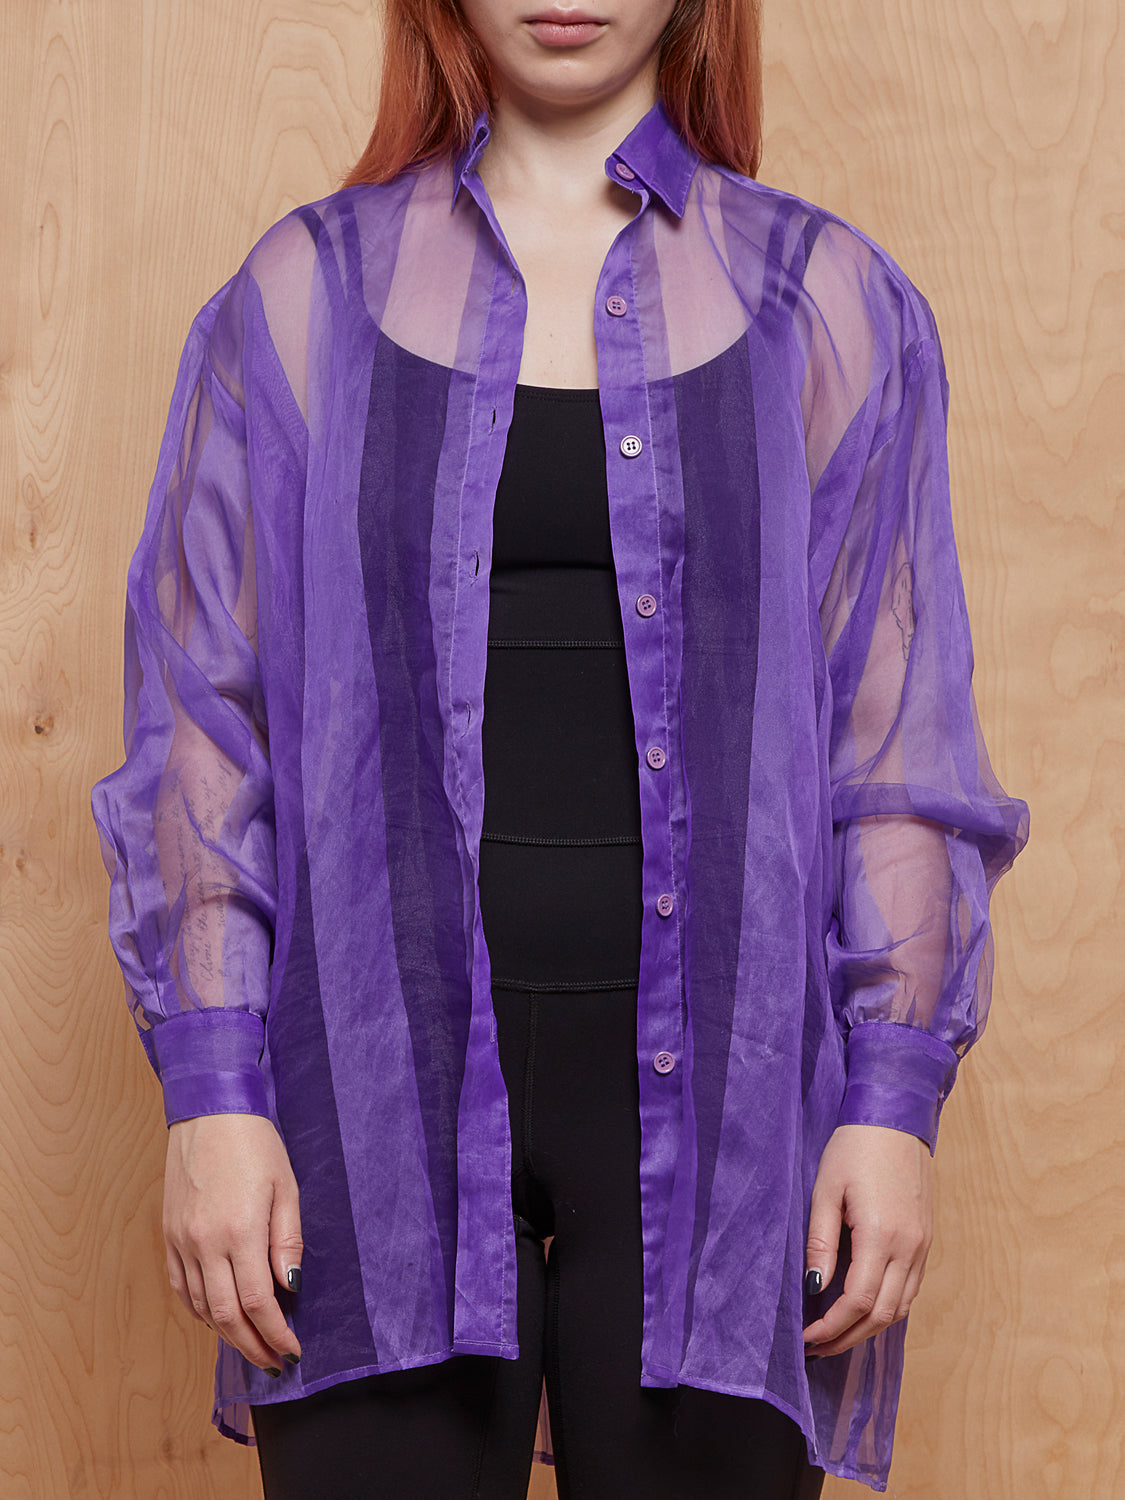 Vintage Sheer Purple Button Up